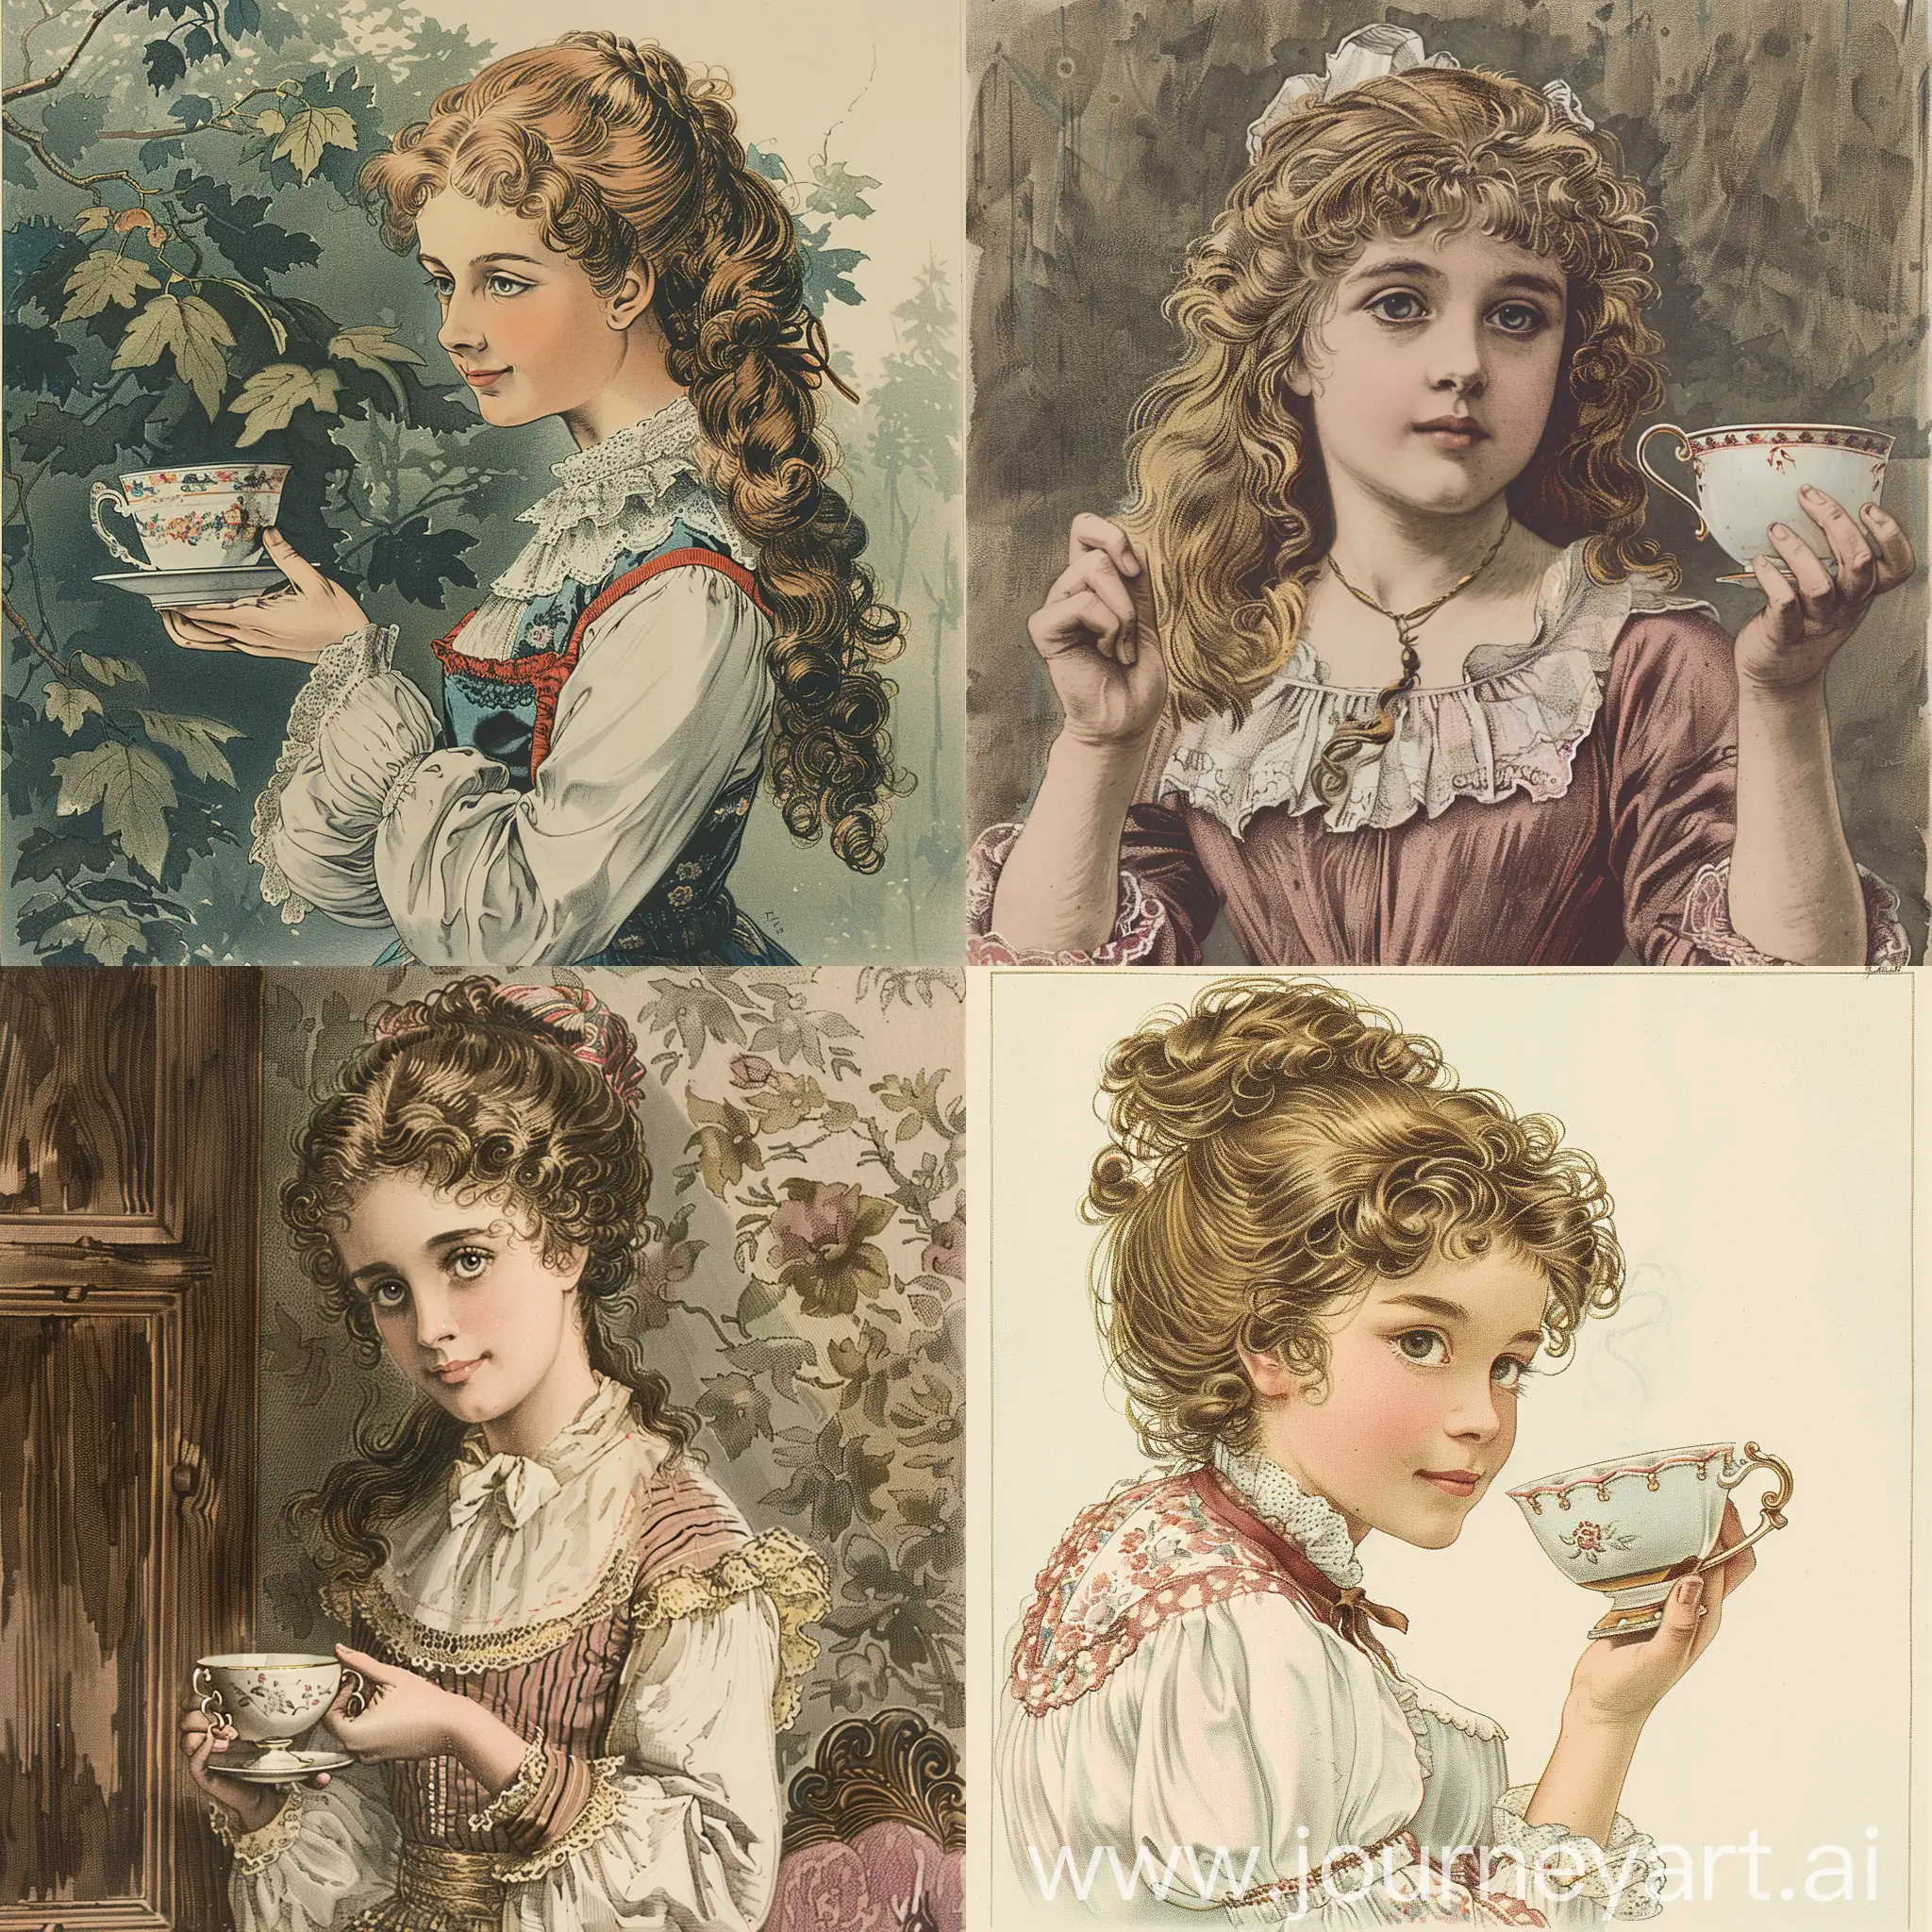 Turgenevs-Novel-Inspired-Portrait-Young-Girl-with-Porcelain-Tea-Cup